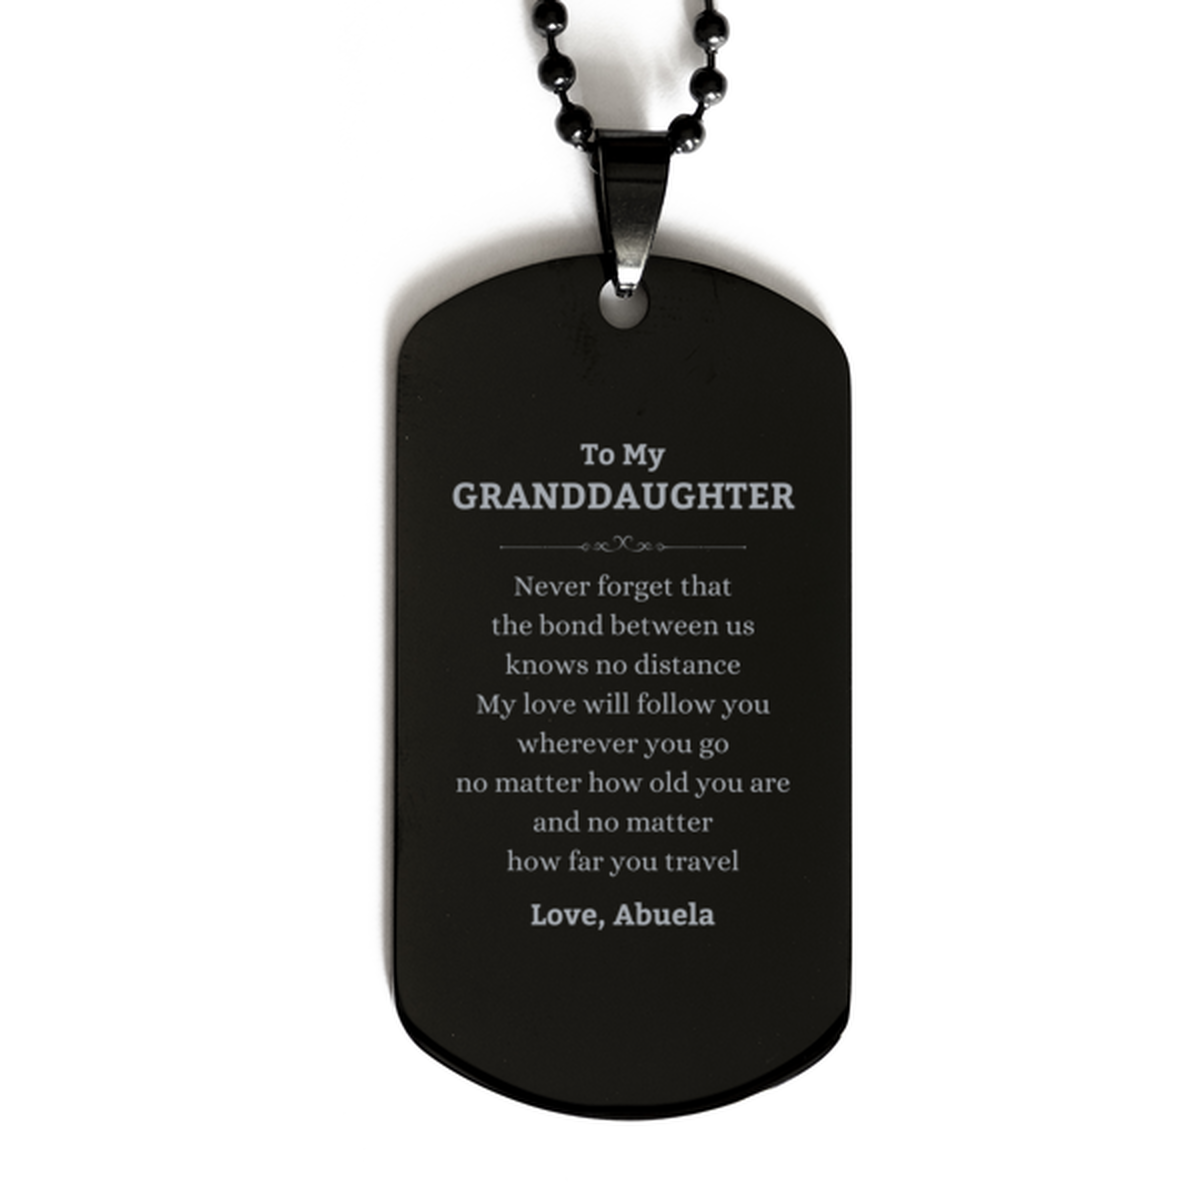 Granddaughter Birthday Gifts from Abuela, Adjustable Black Dog Tag for Granddaughter Christmas Graduation Unique Gifts Granddaughter Never forget that the bond between us knows no distance. Love, Abuela